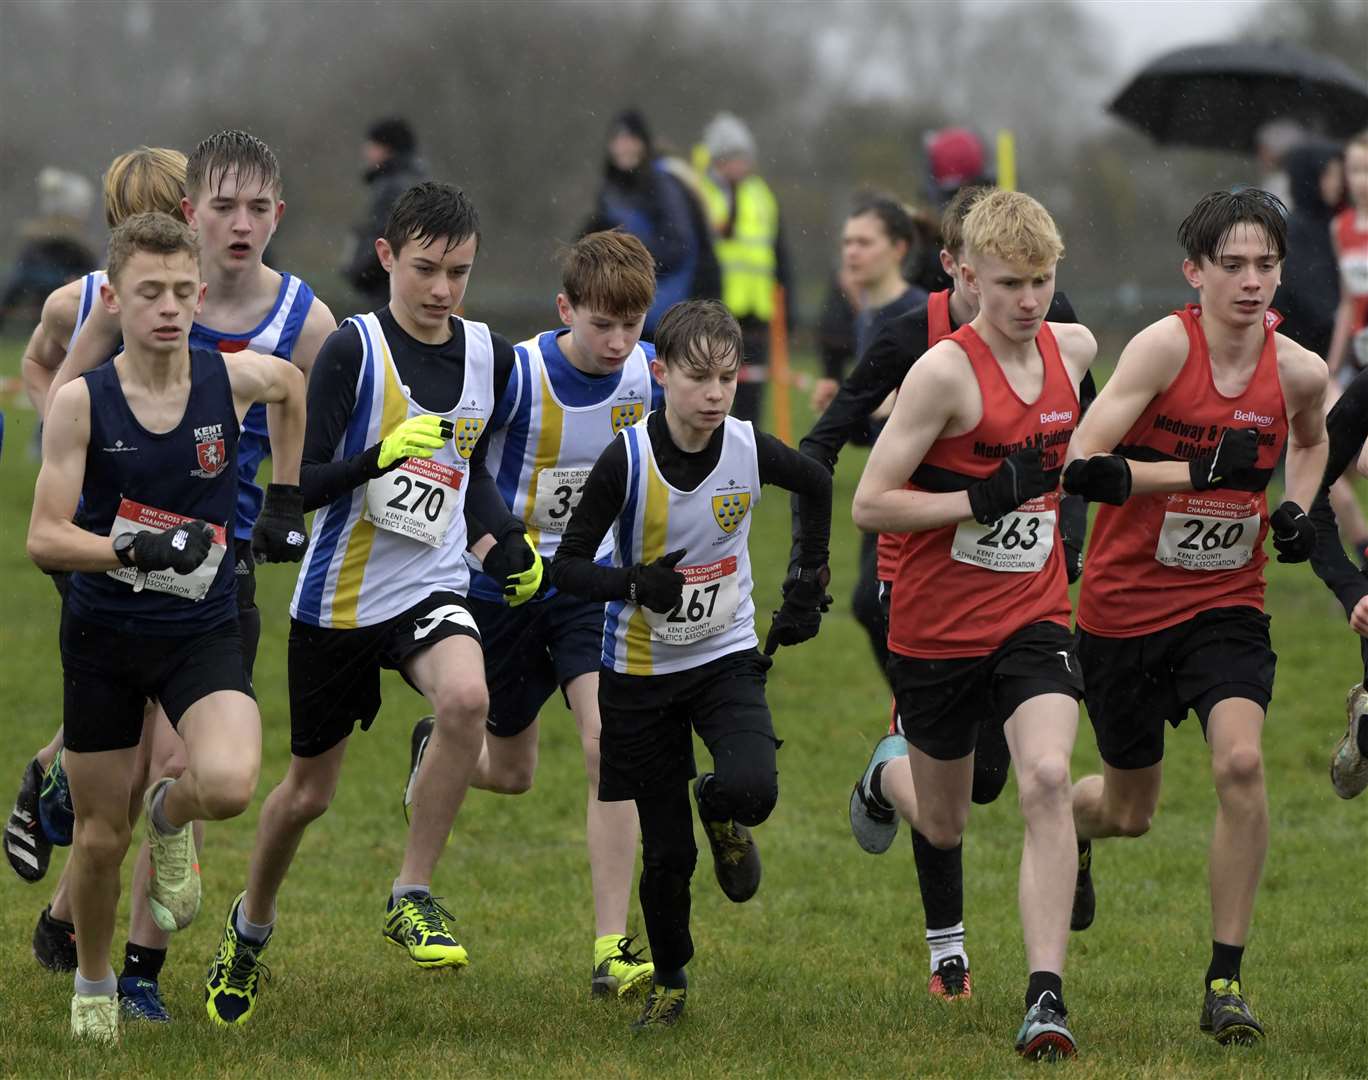 Medway and Maidstone duo Franklin Shepherd (No.263) and Riley Maisey (No.260) jostle for position alongside several Sevenoaks AC runners, led by Ryan Alford-Smith (No.267), in the under-15 boys' race. Picture: Barry Goodwin (54151866)